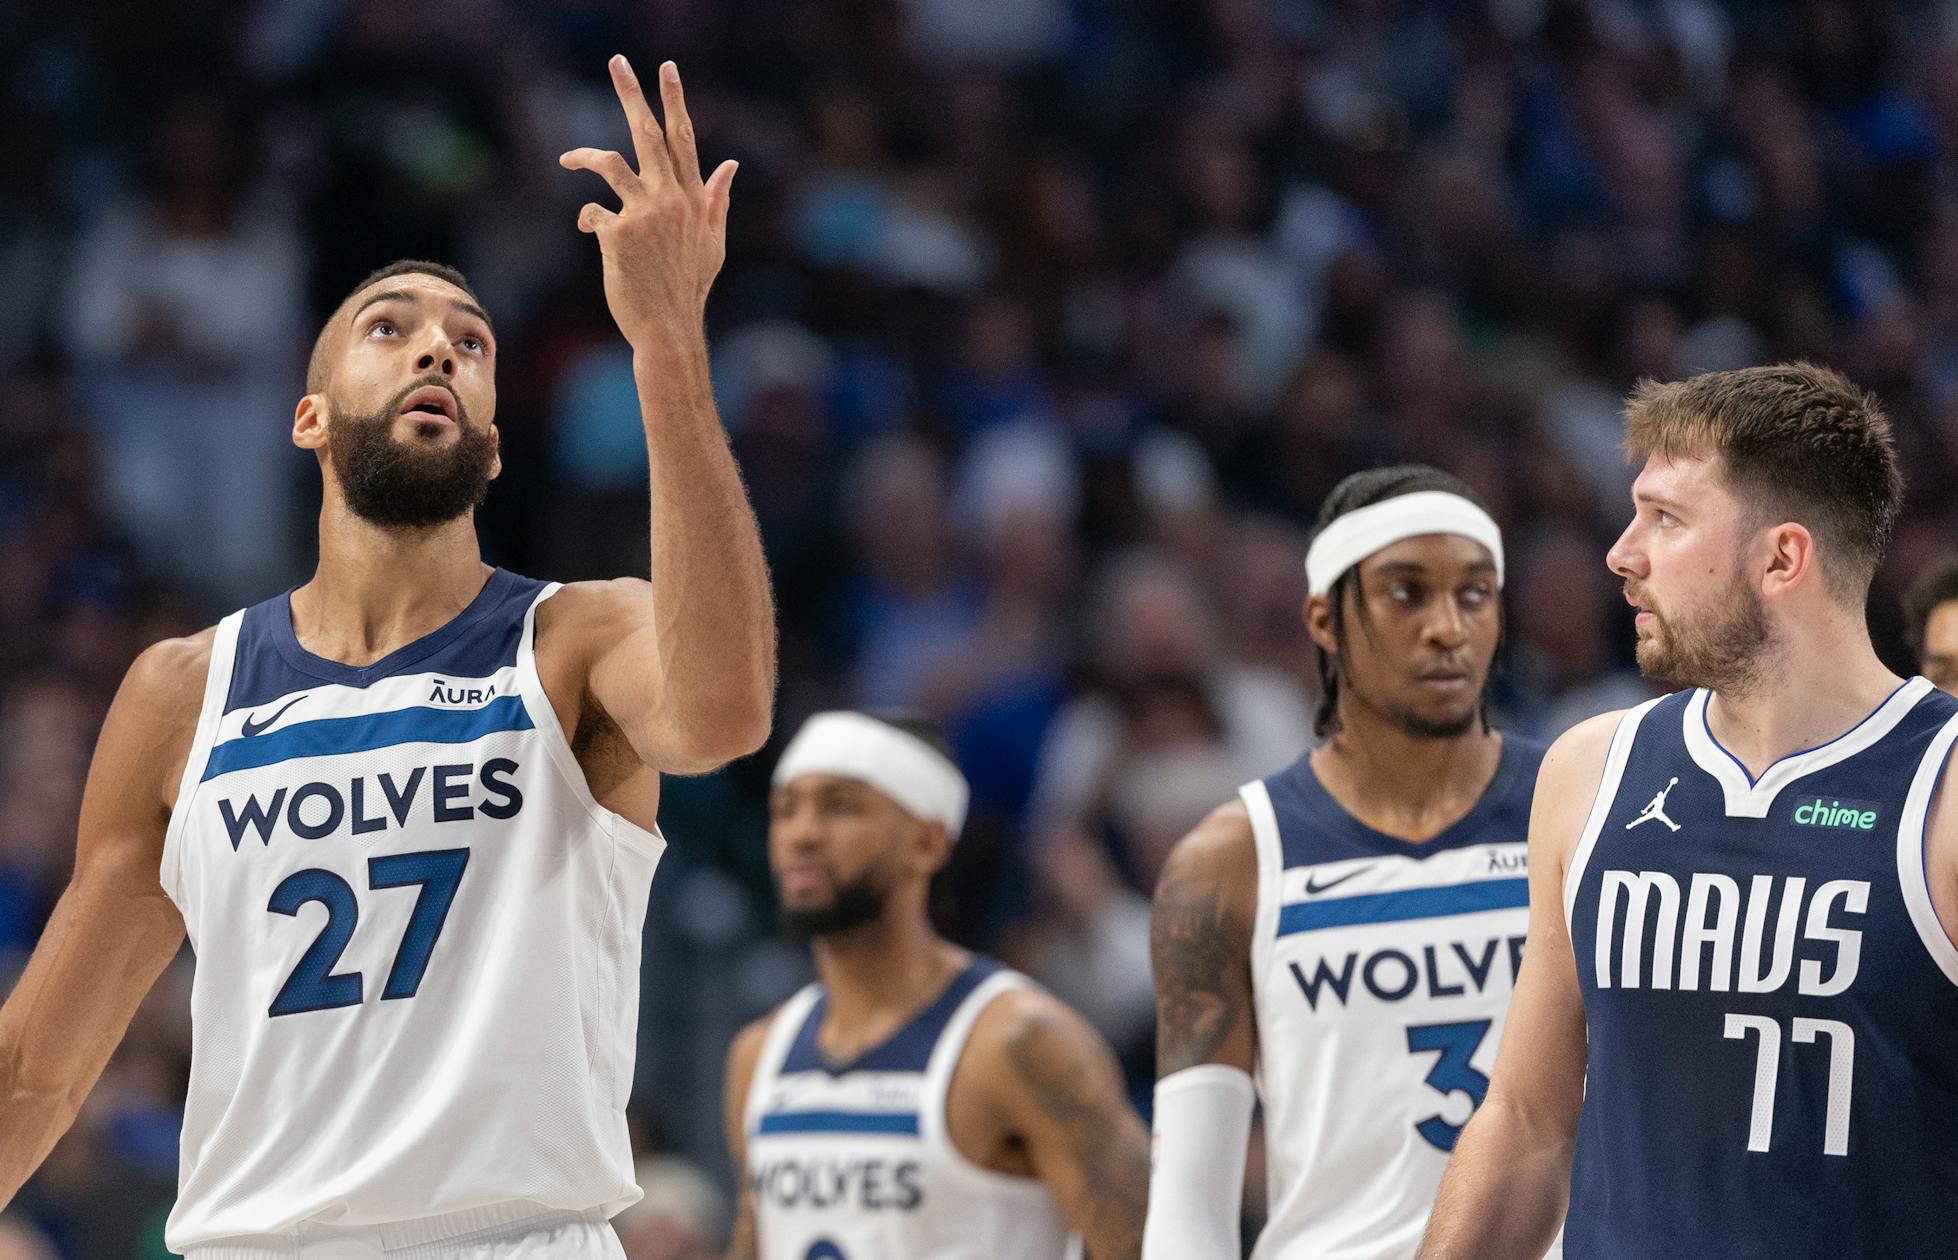 The Unlikely Odds Faced by the Timberwolves, as Discussed by Patrick Reusse and Michael Rand